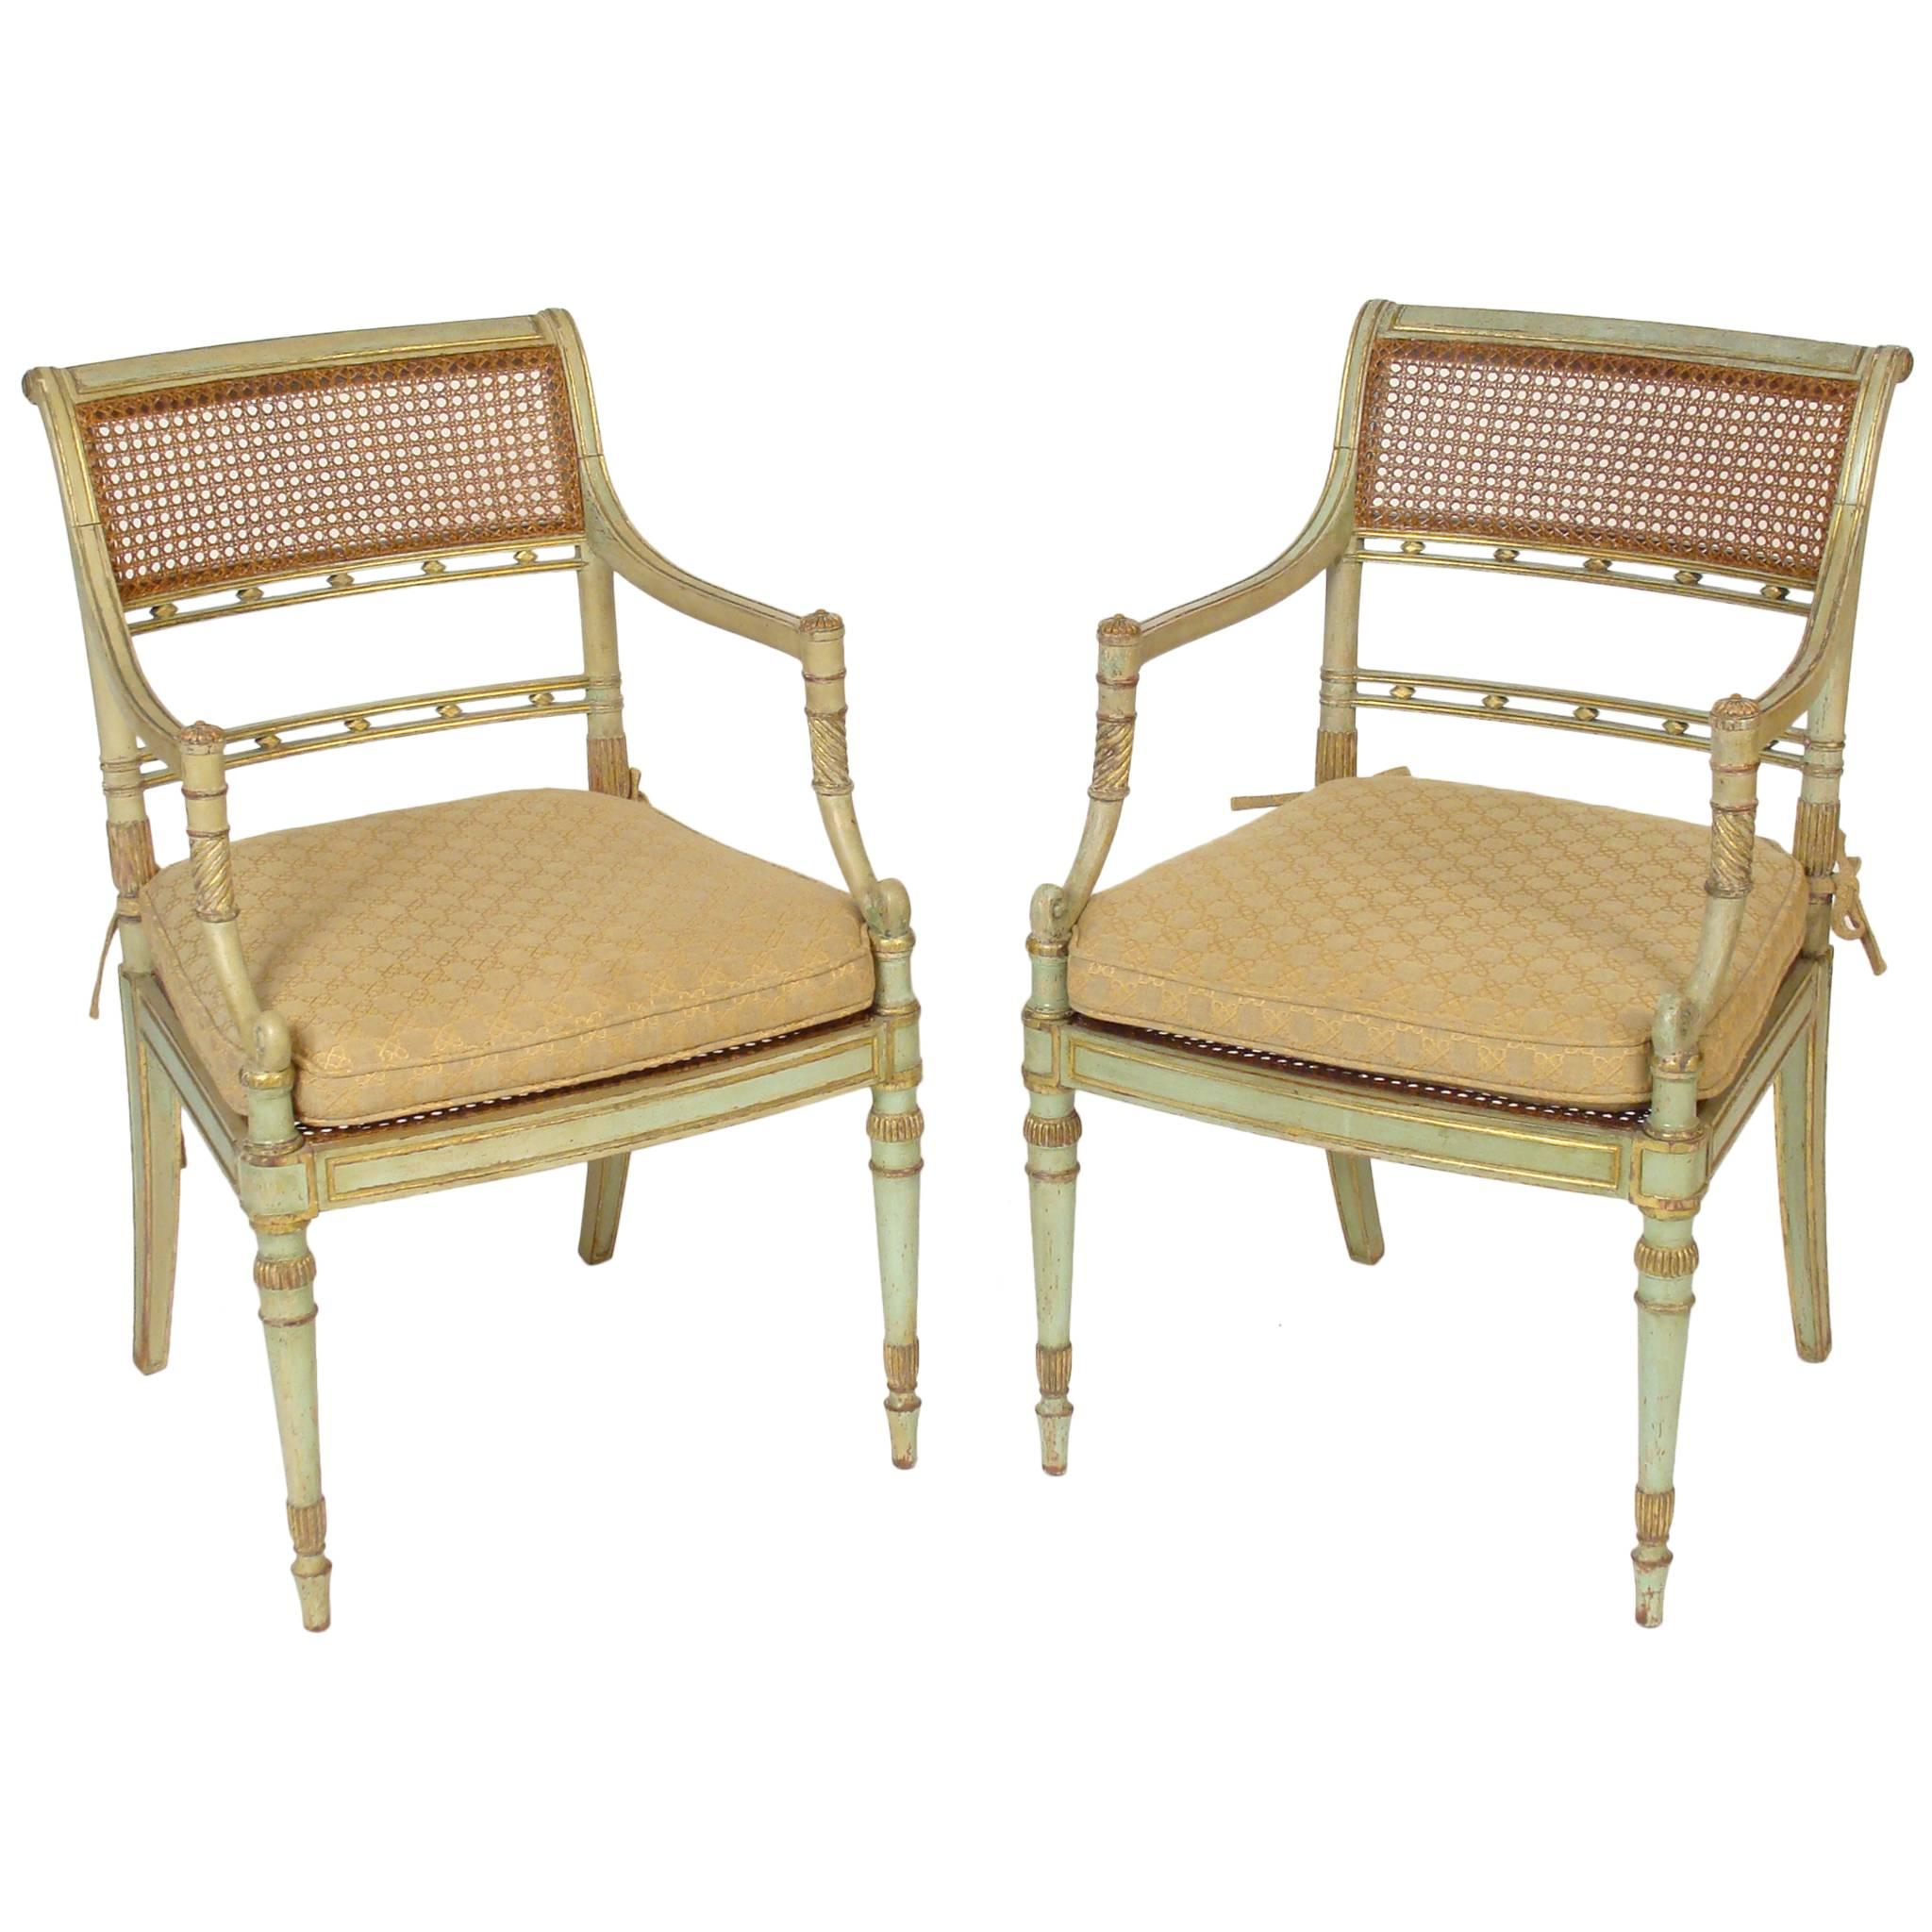 Pair of Painted English Regency Style Armchairs